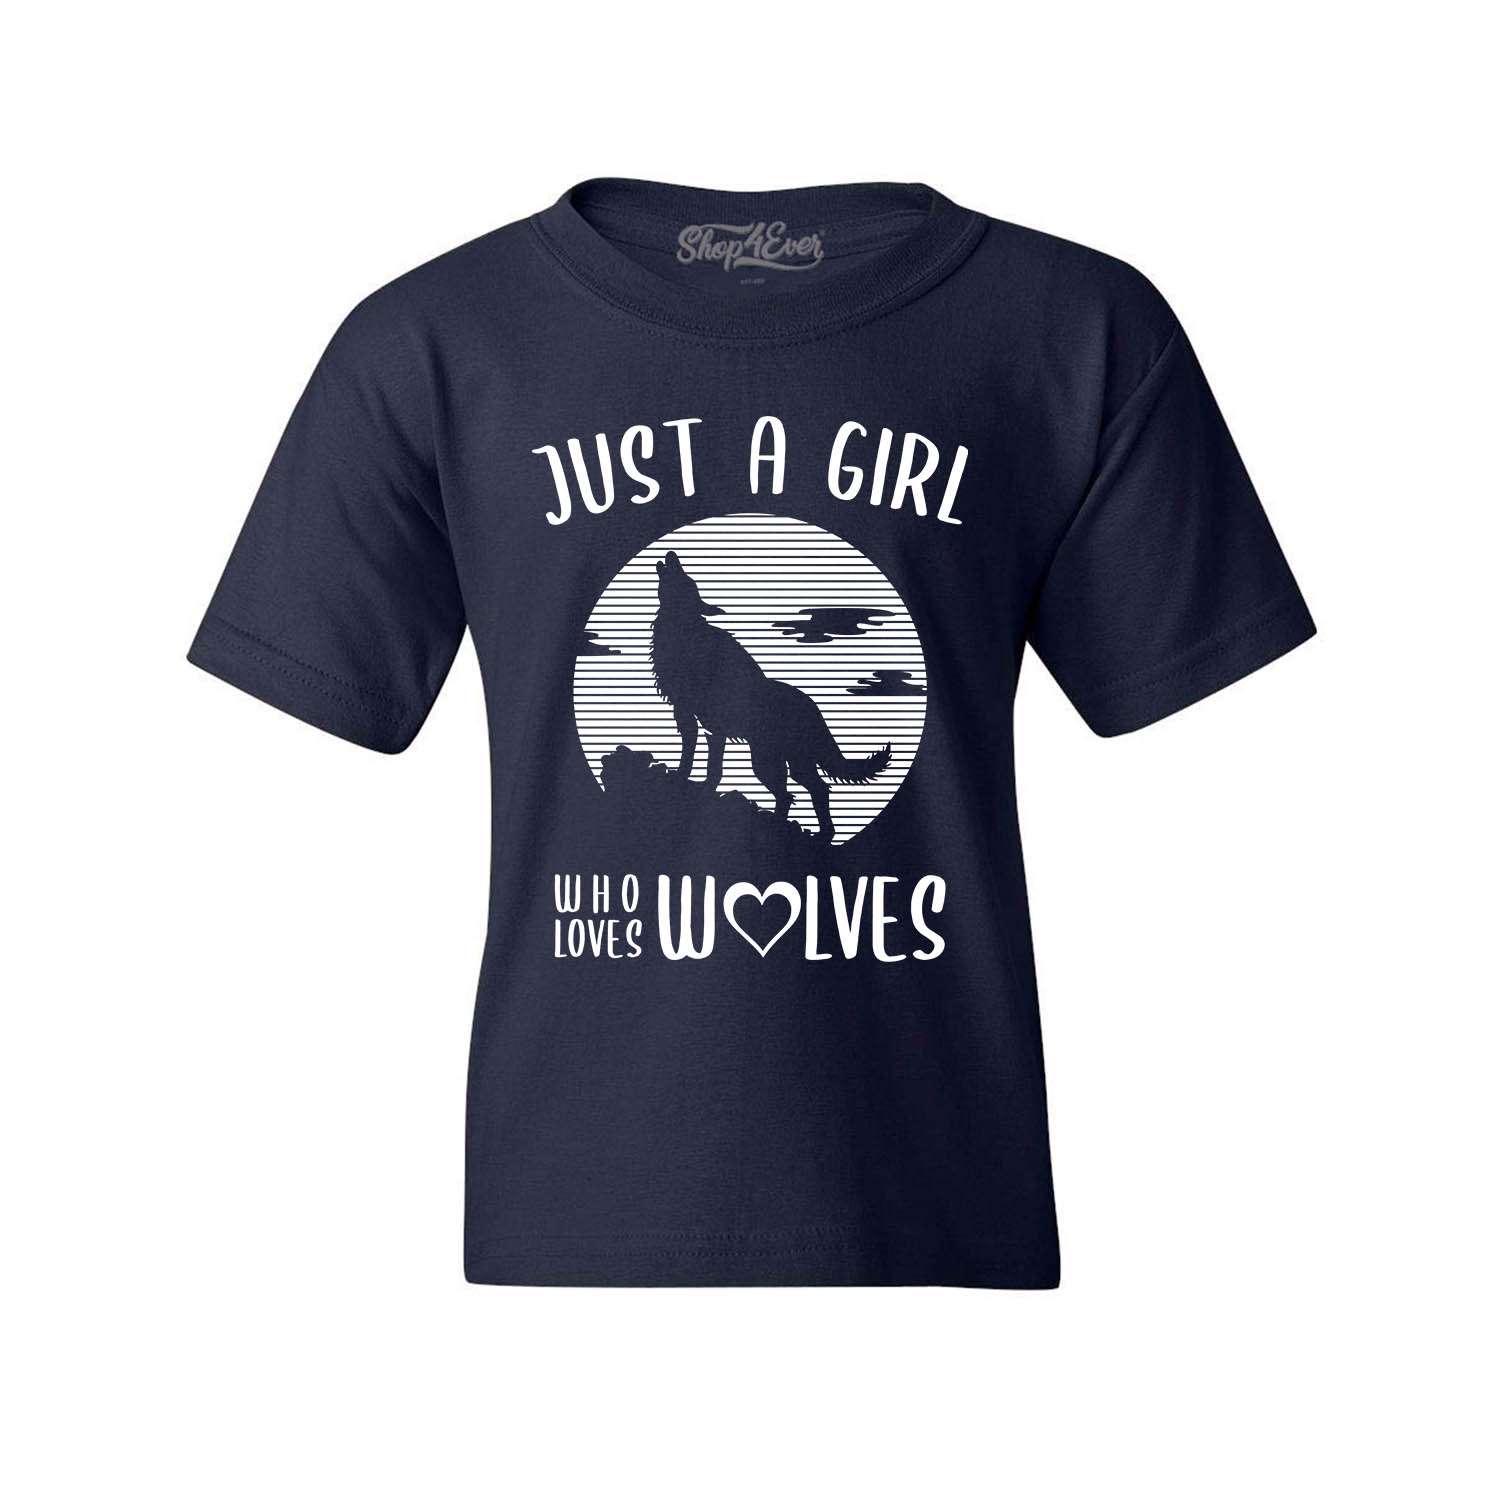 Wolf Tee Shirt Just A Girl Who Loves Wolves Wolf Shirt Animal Lover Shirt Wolf Lover Animal Shirt Wolf Gift Wolves Women Wolf Shirt